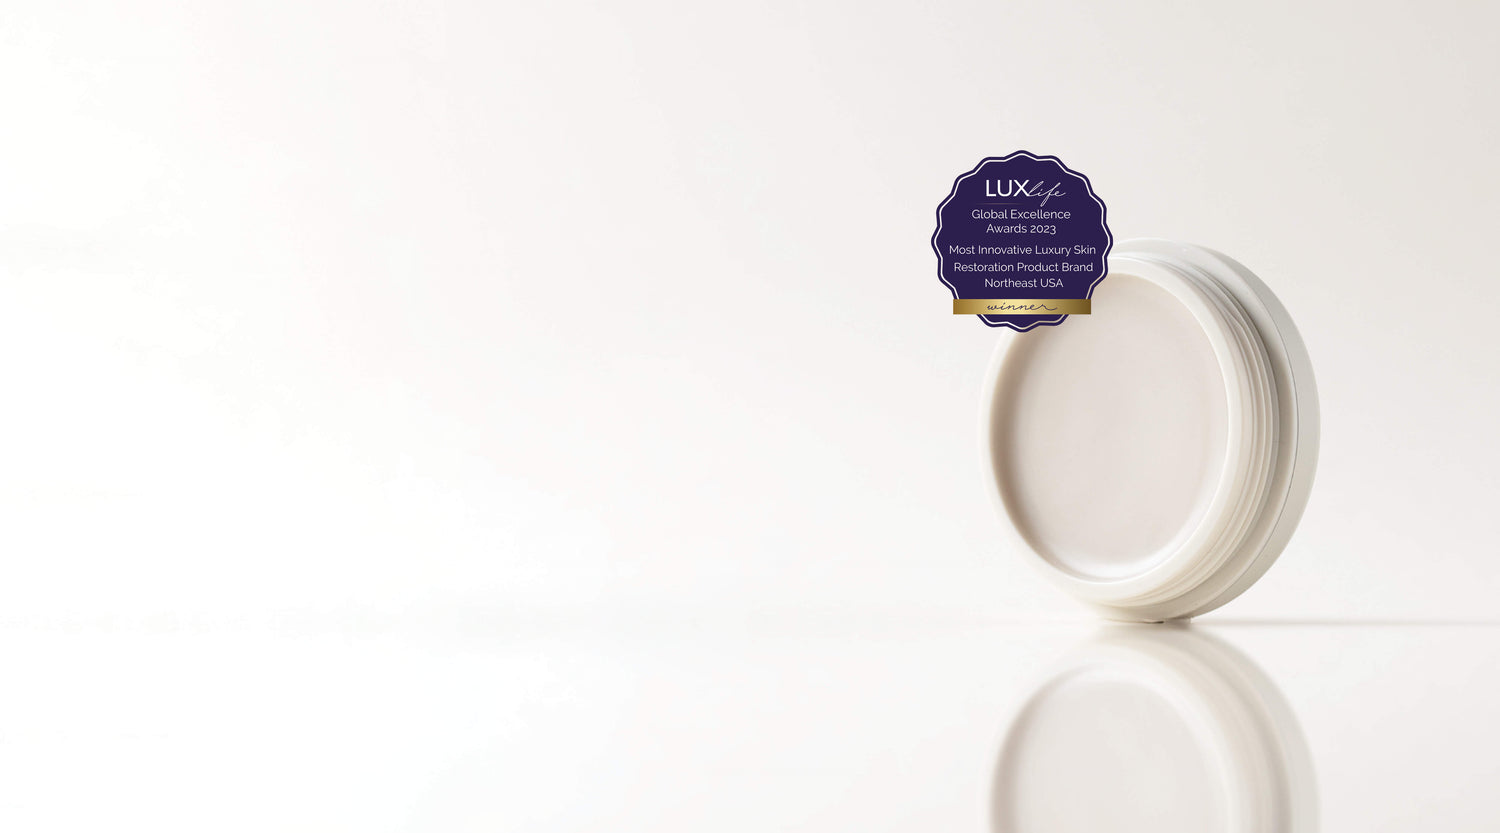 Bonjout Beauty's Le Balm product with LUX Life Award for Global Excellence 2023